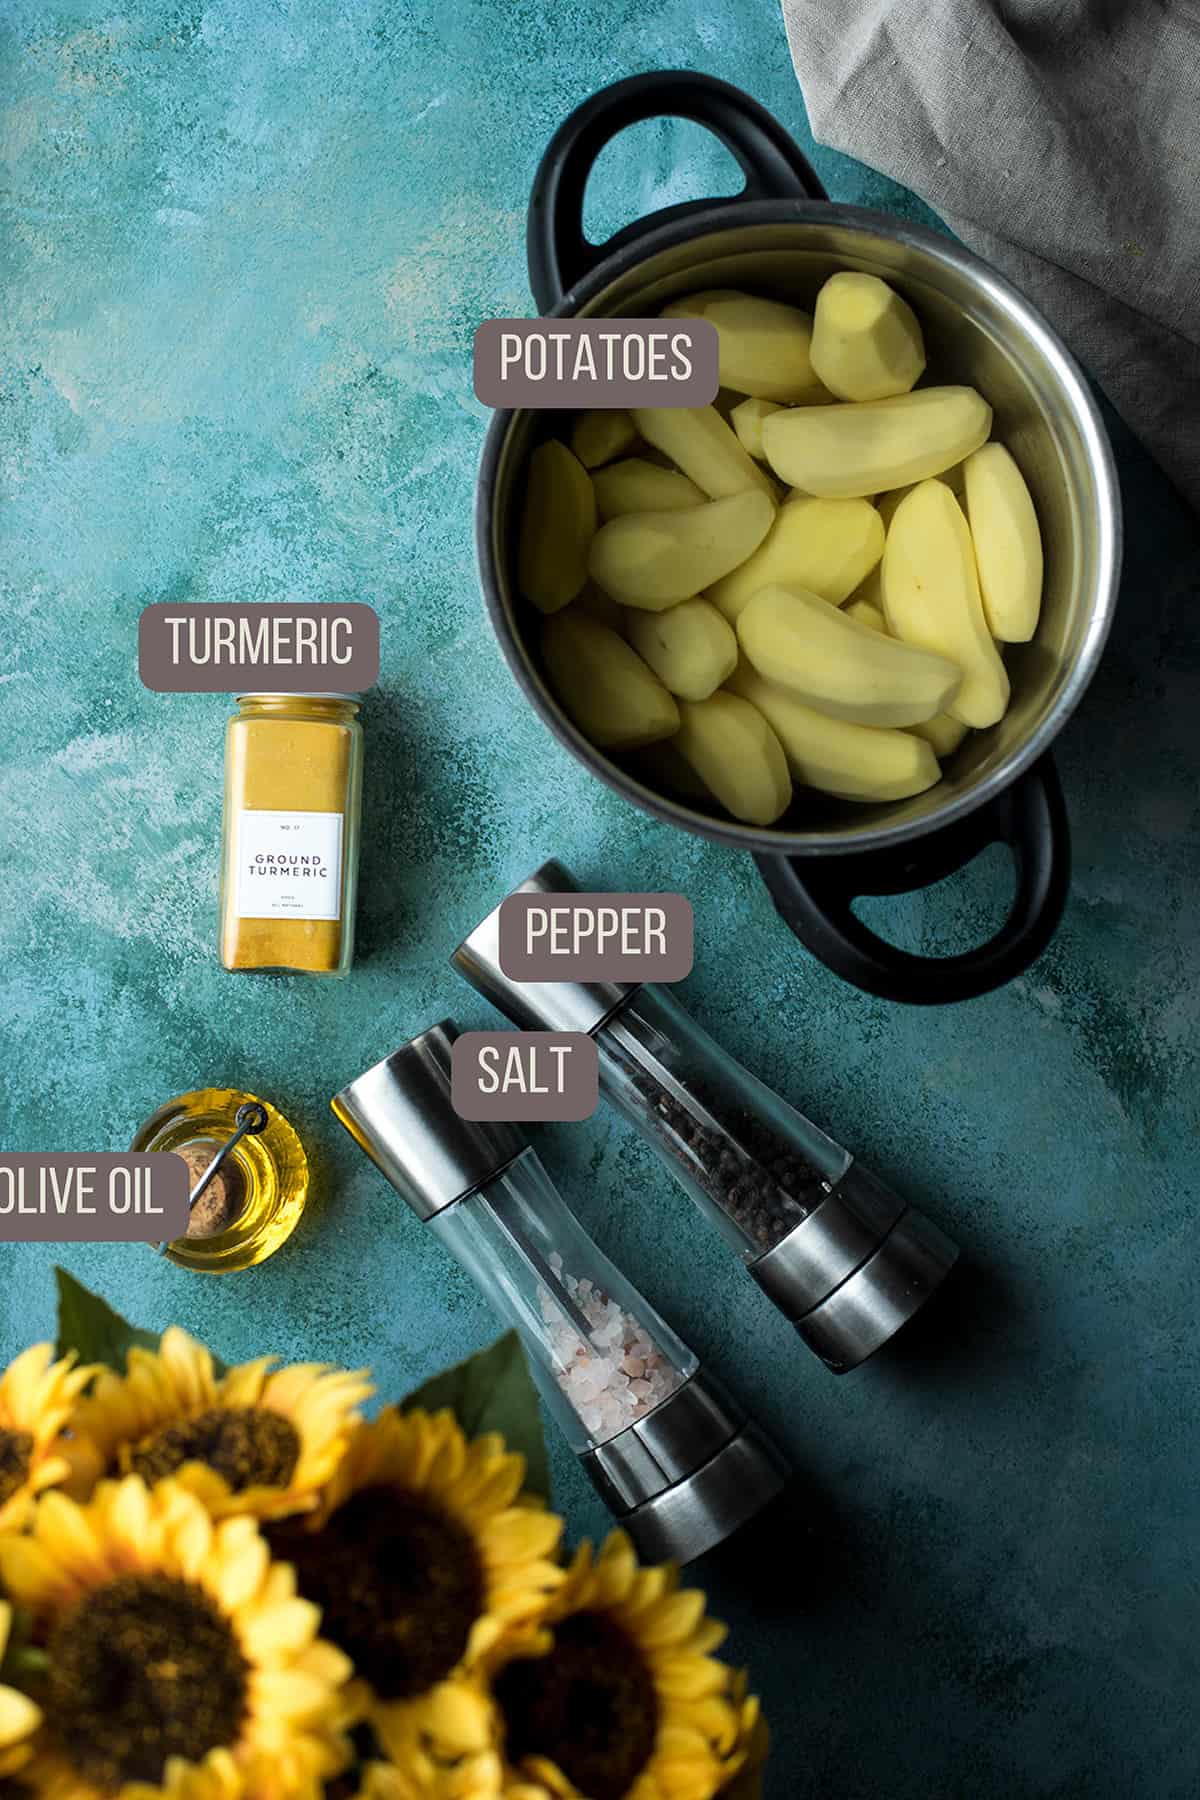 Ingredients to make the potatoes, on a turquoise table.